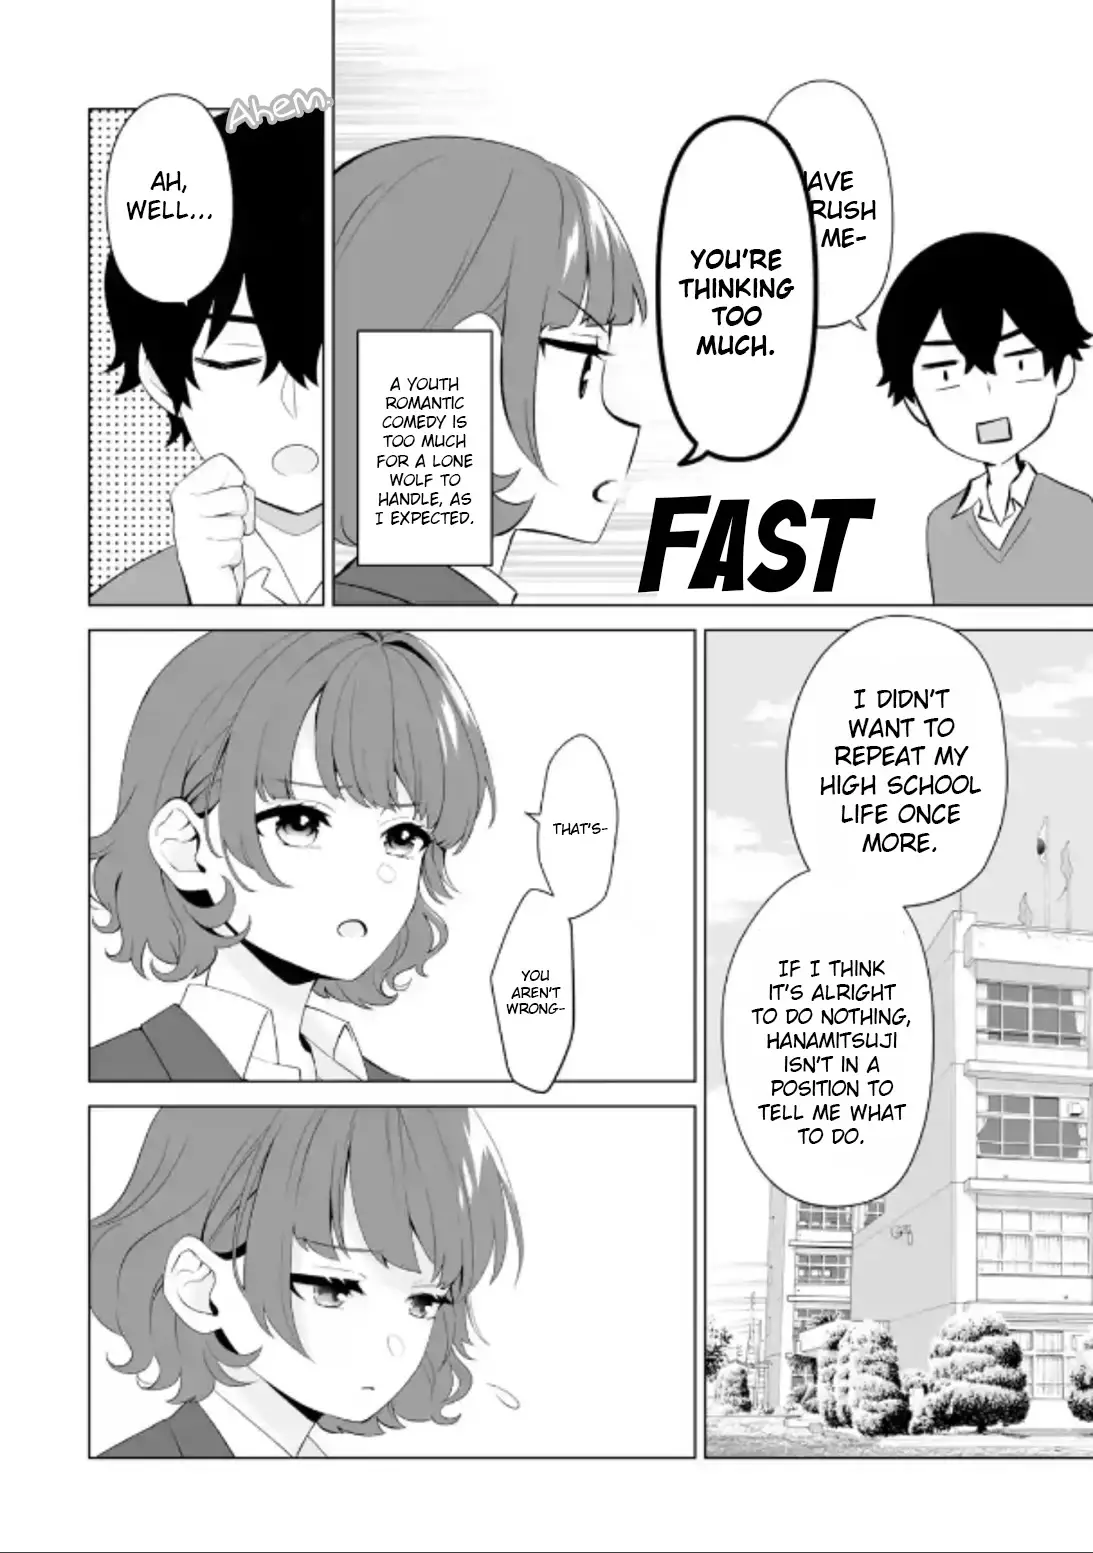 Please Leave Me Alone (For Some Reason, She Wants To Change A Lone Wolf's Helpless High School Life.) - 3 page 22-4c307b18